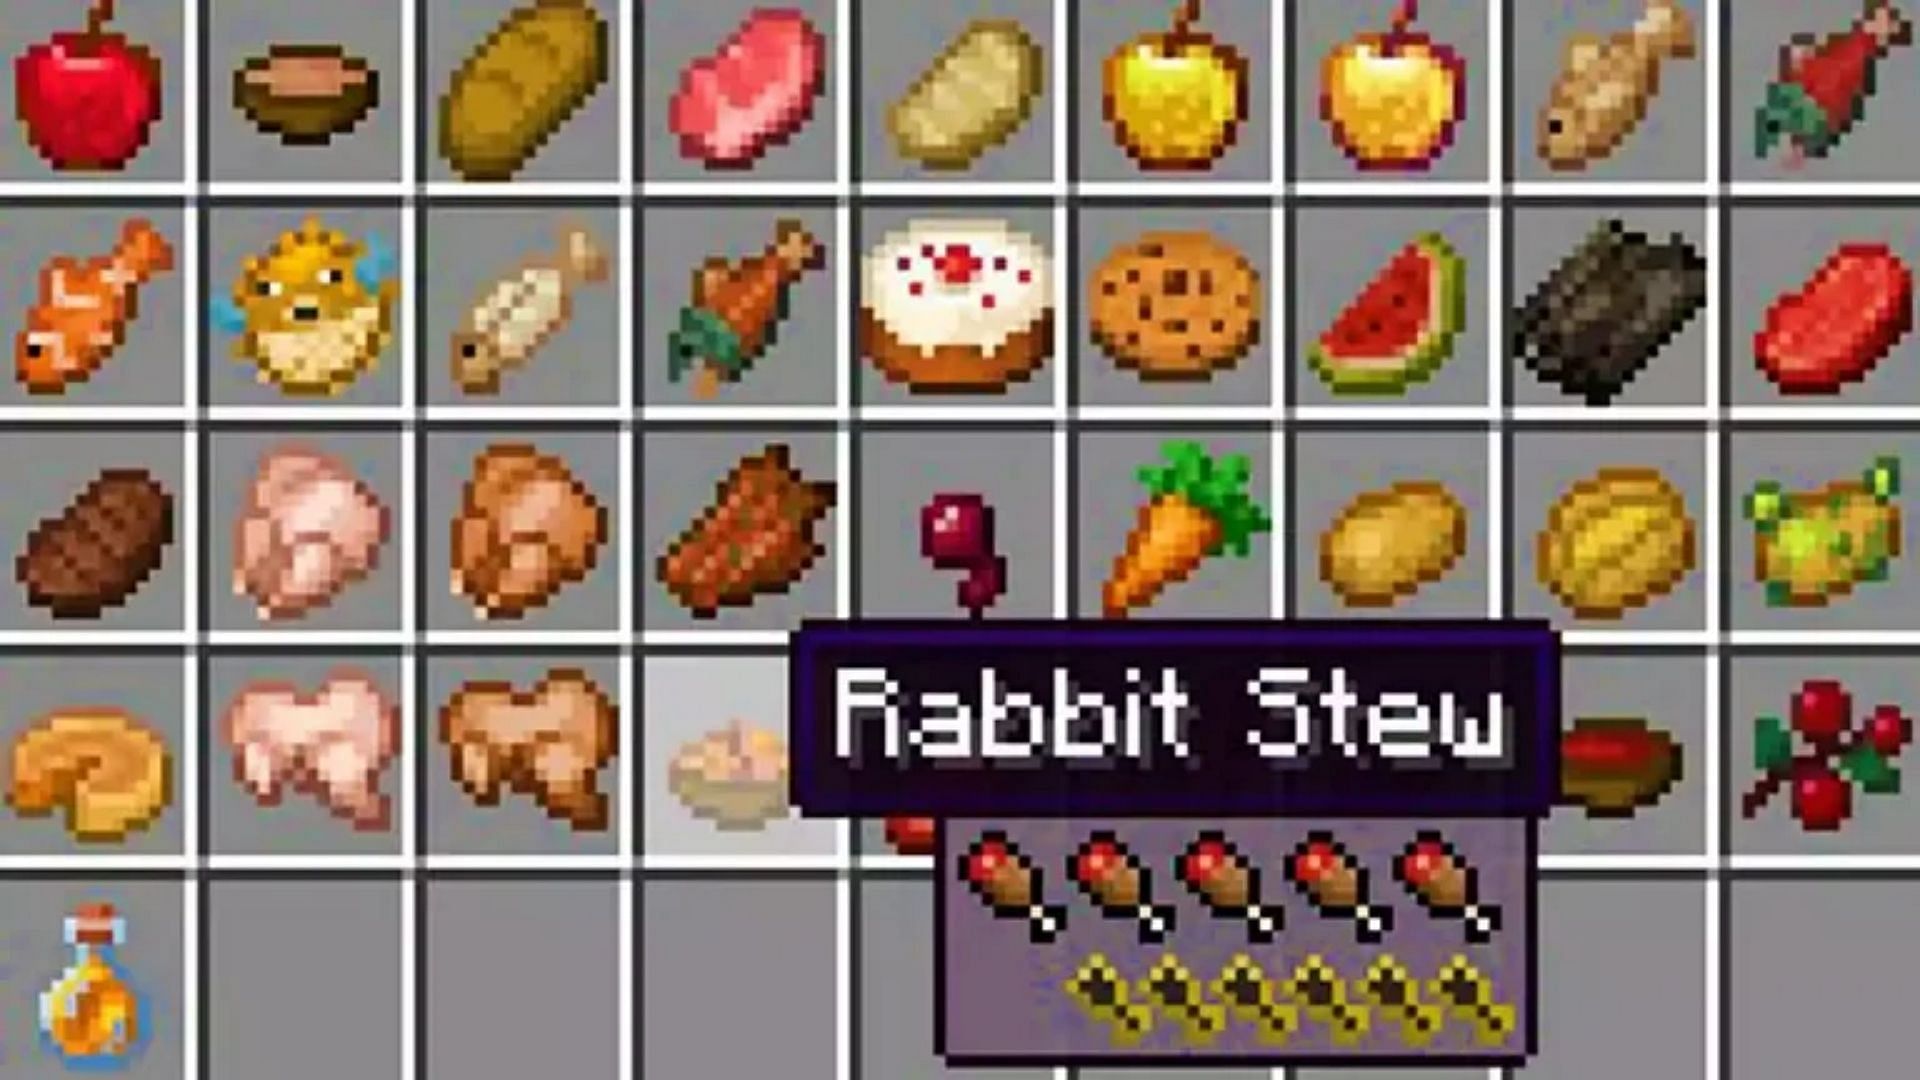 AppleSkin mod shows more detailed information about Minecraft food items (Image via Mojang)